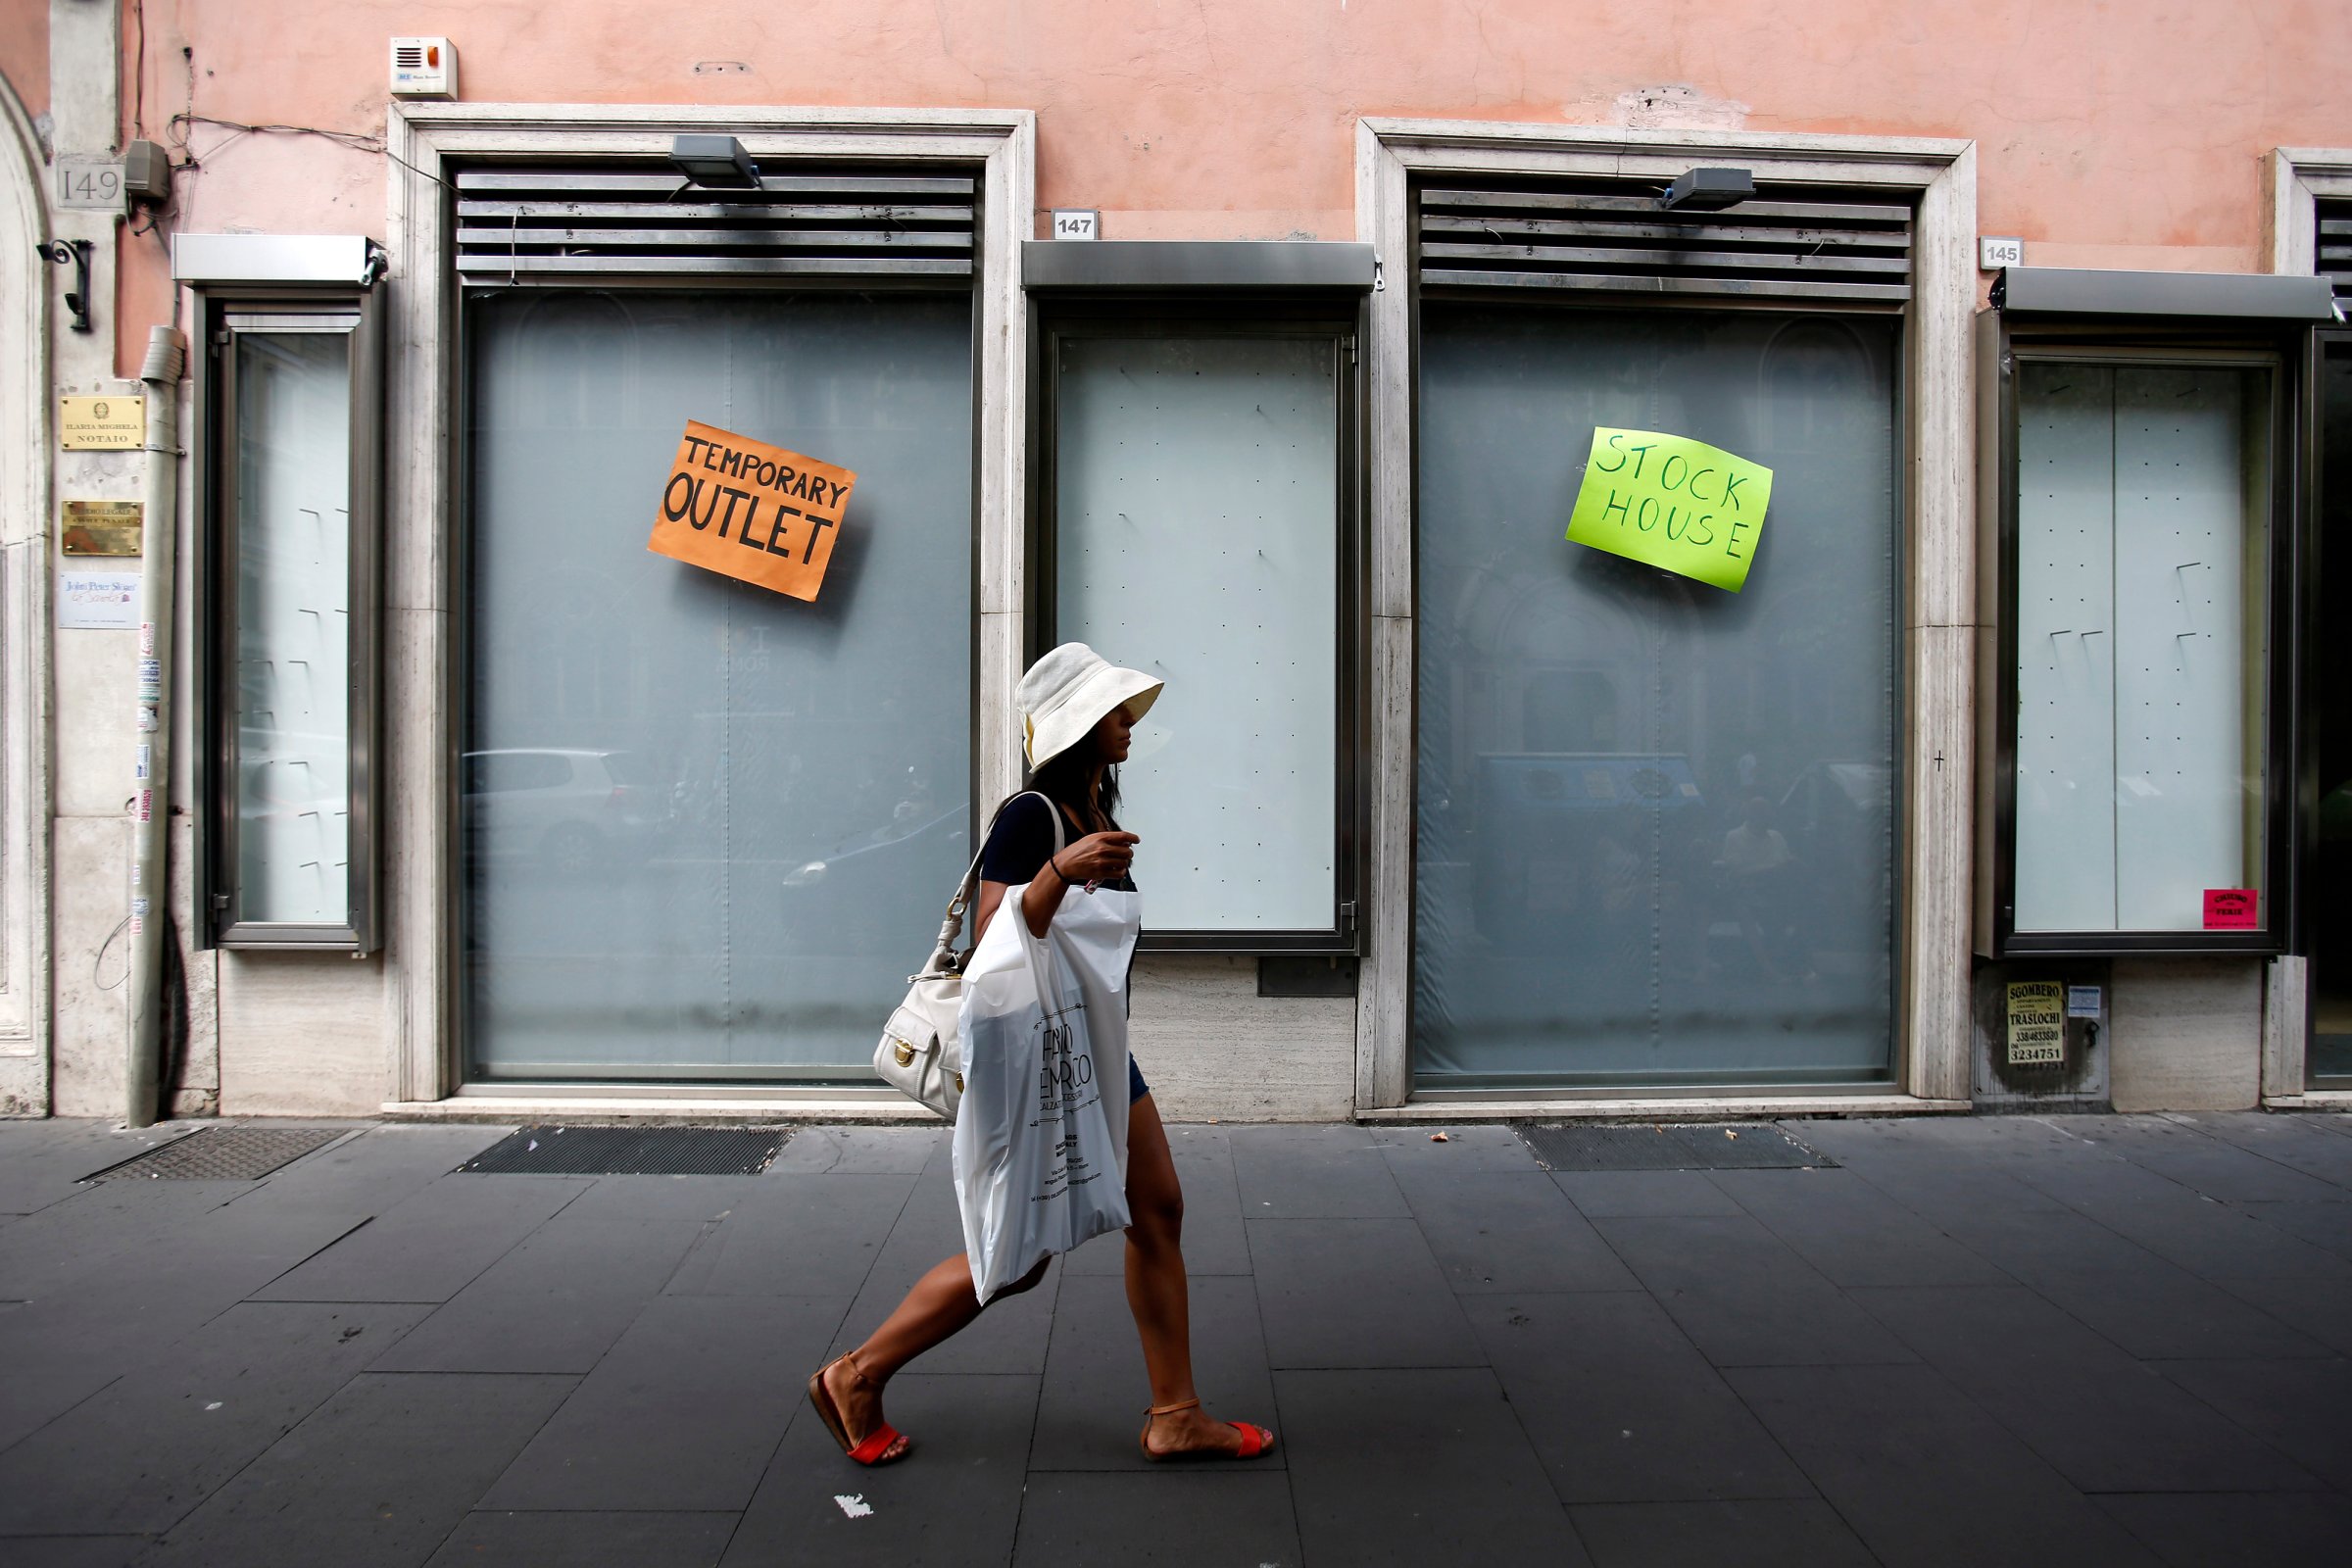 Rome As Italy Returns To Recession In Second-Quarter